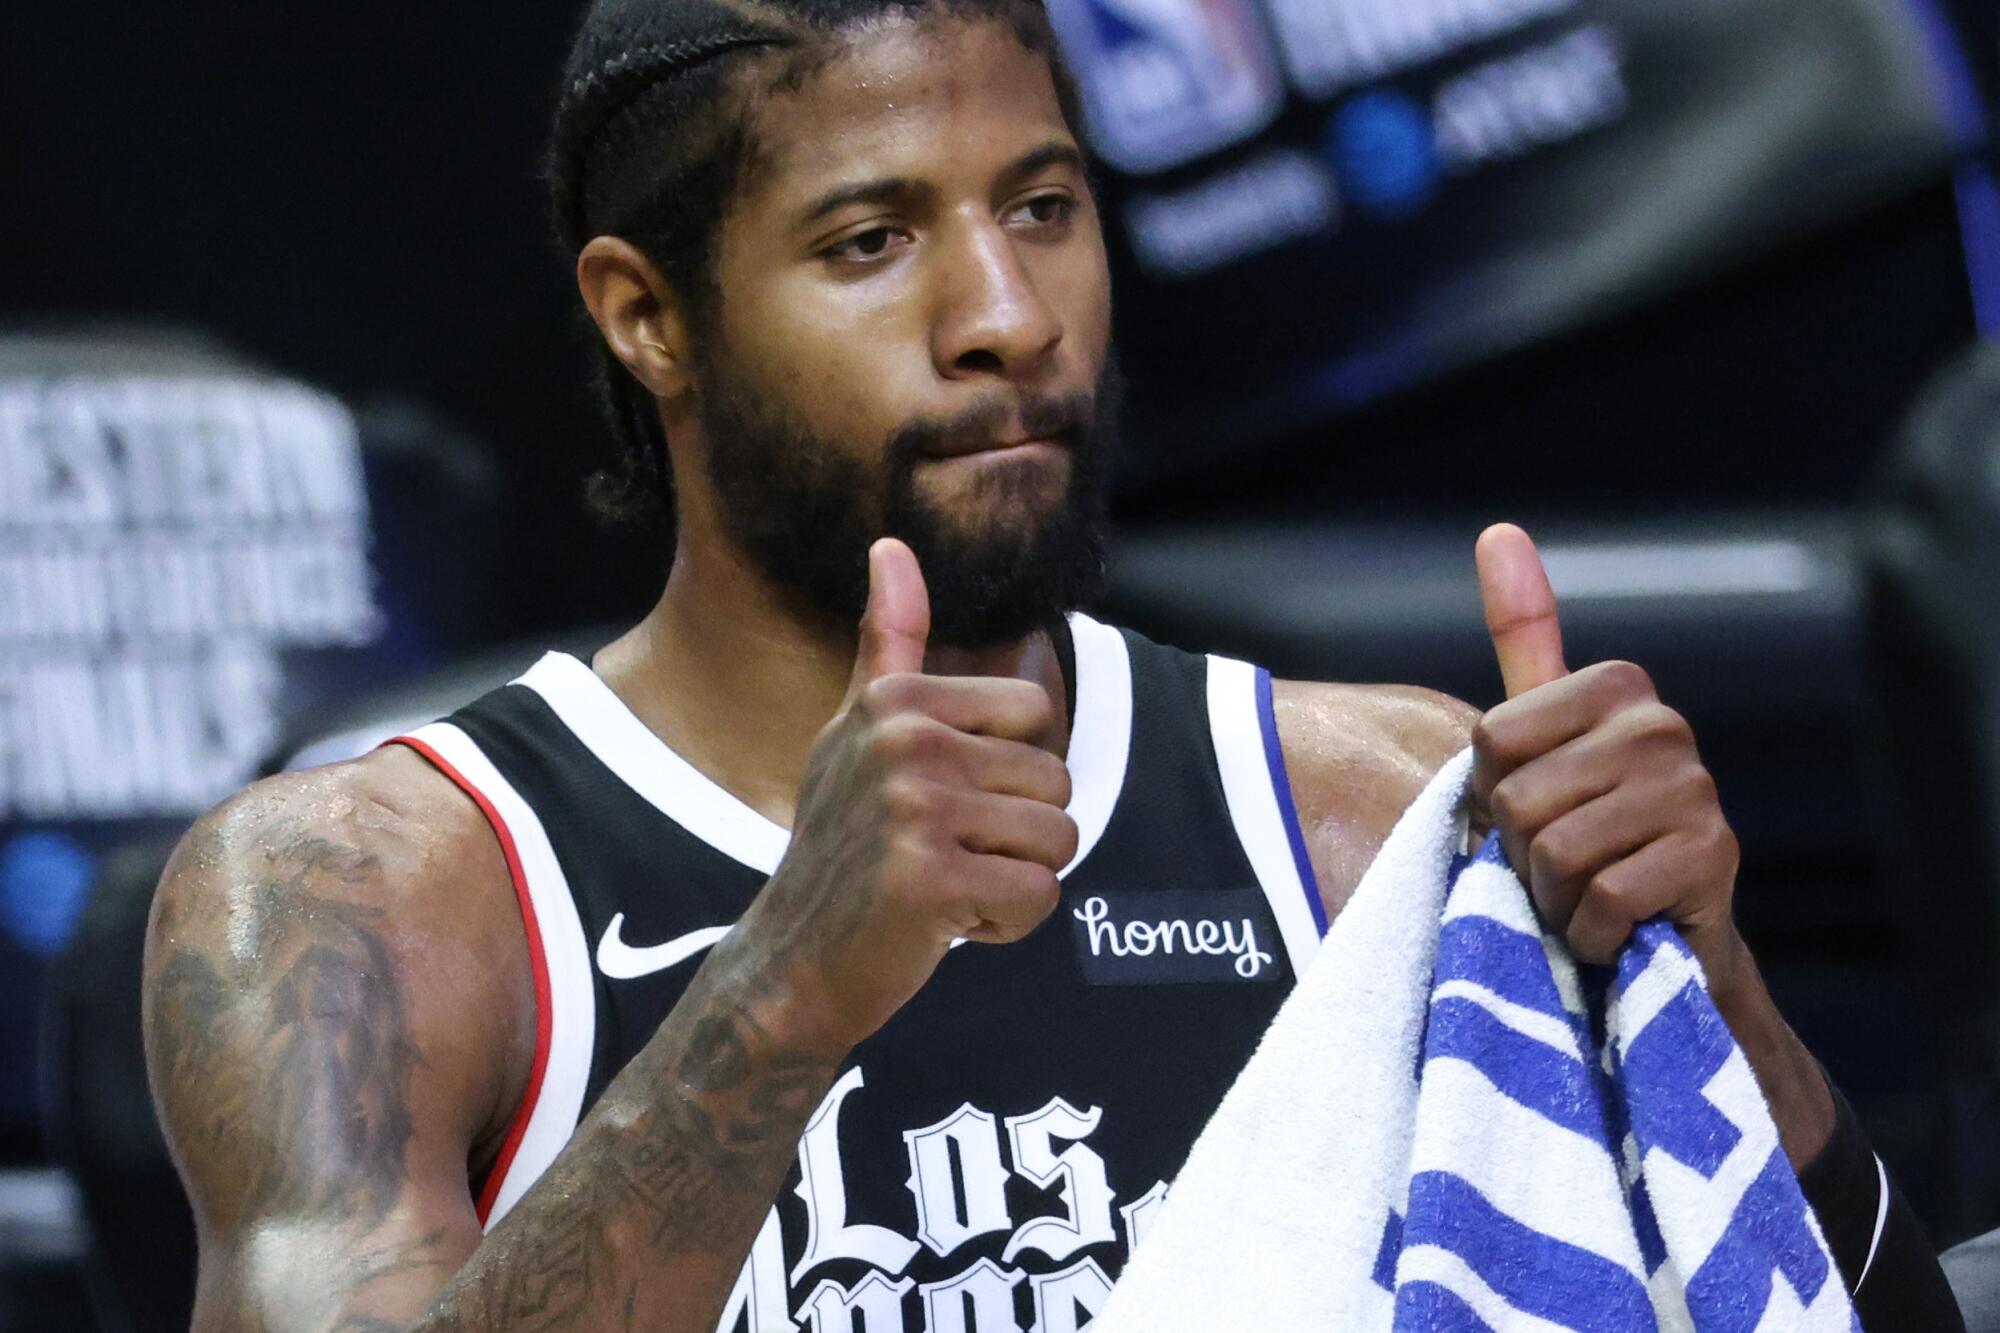 Paul George flashes the thumbs-up sign to fans after the Clippers defeated Phoenix in Game 3 of Western Conference finals.